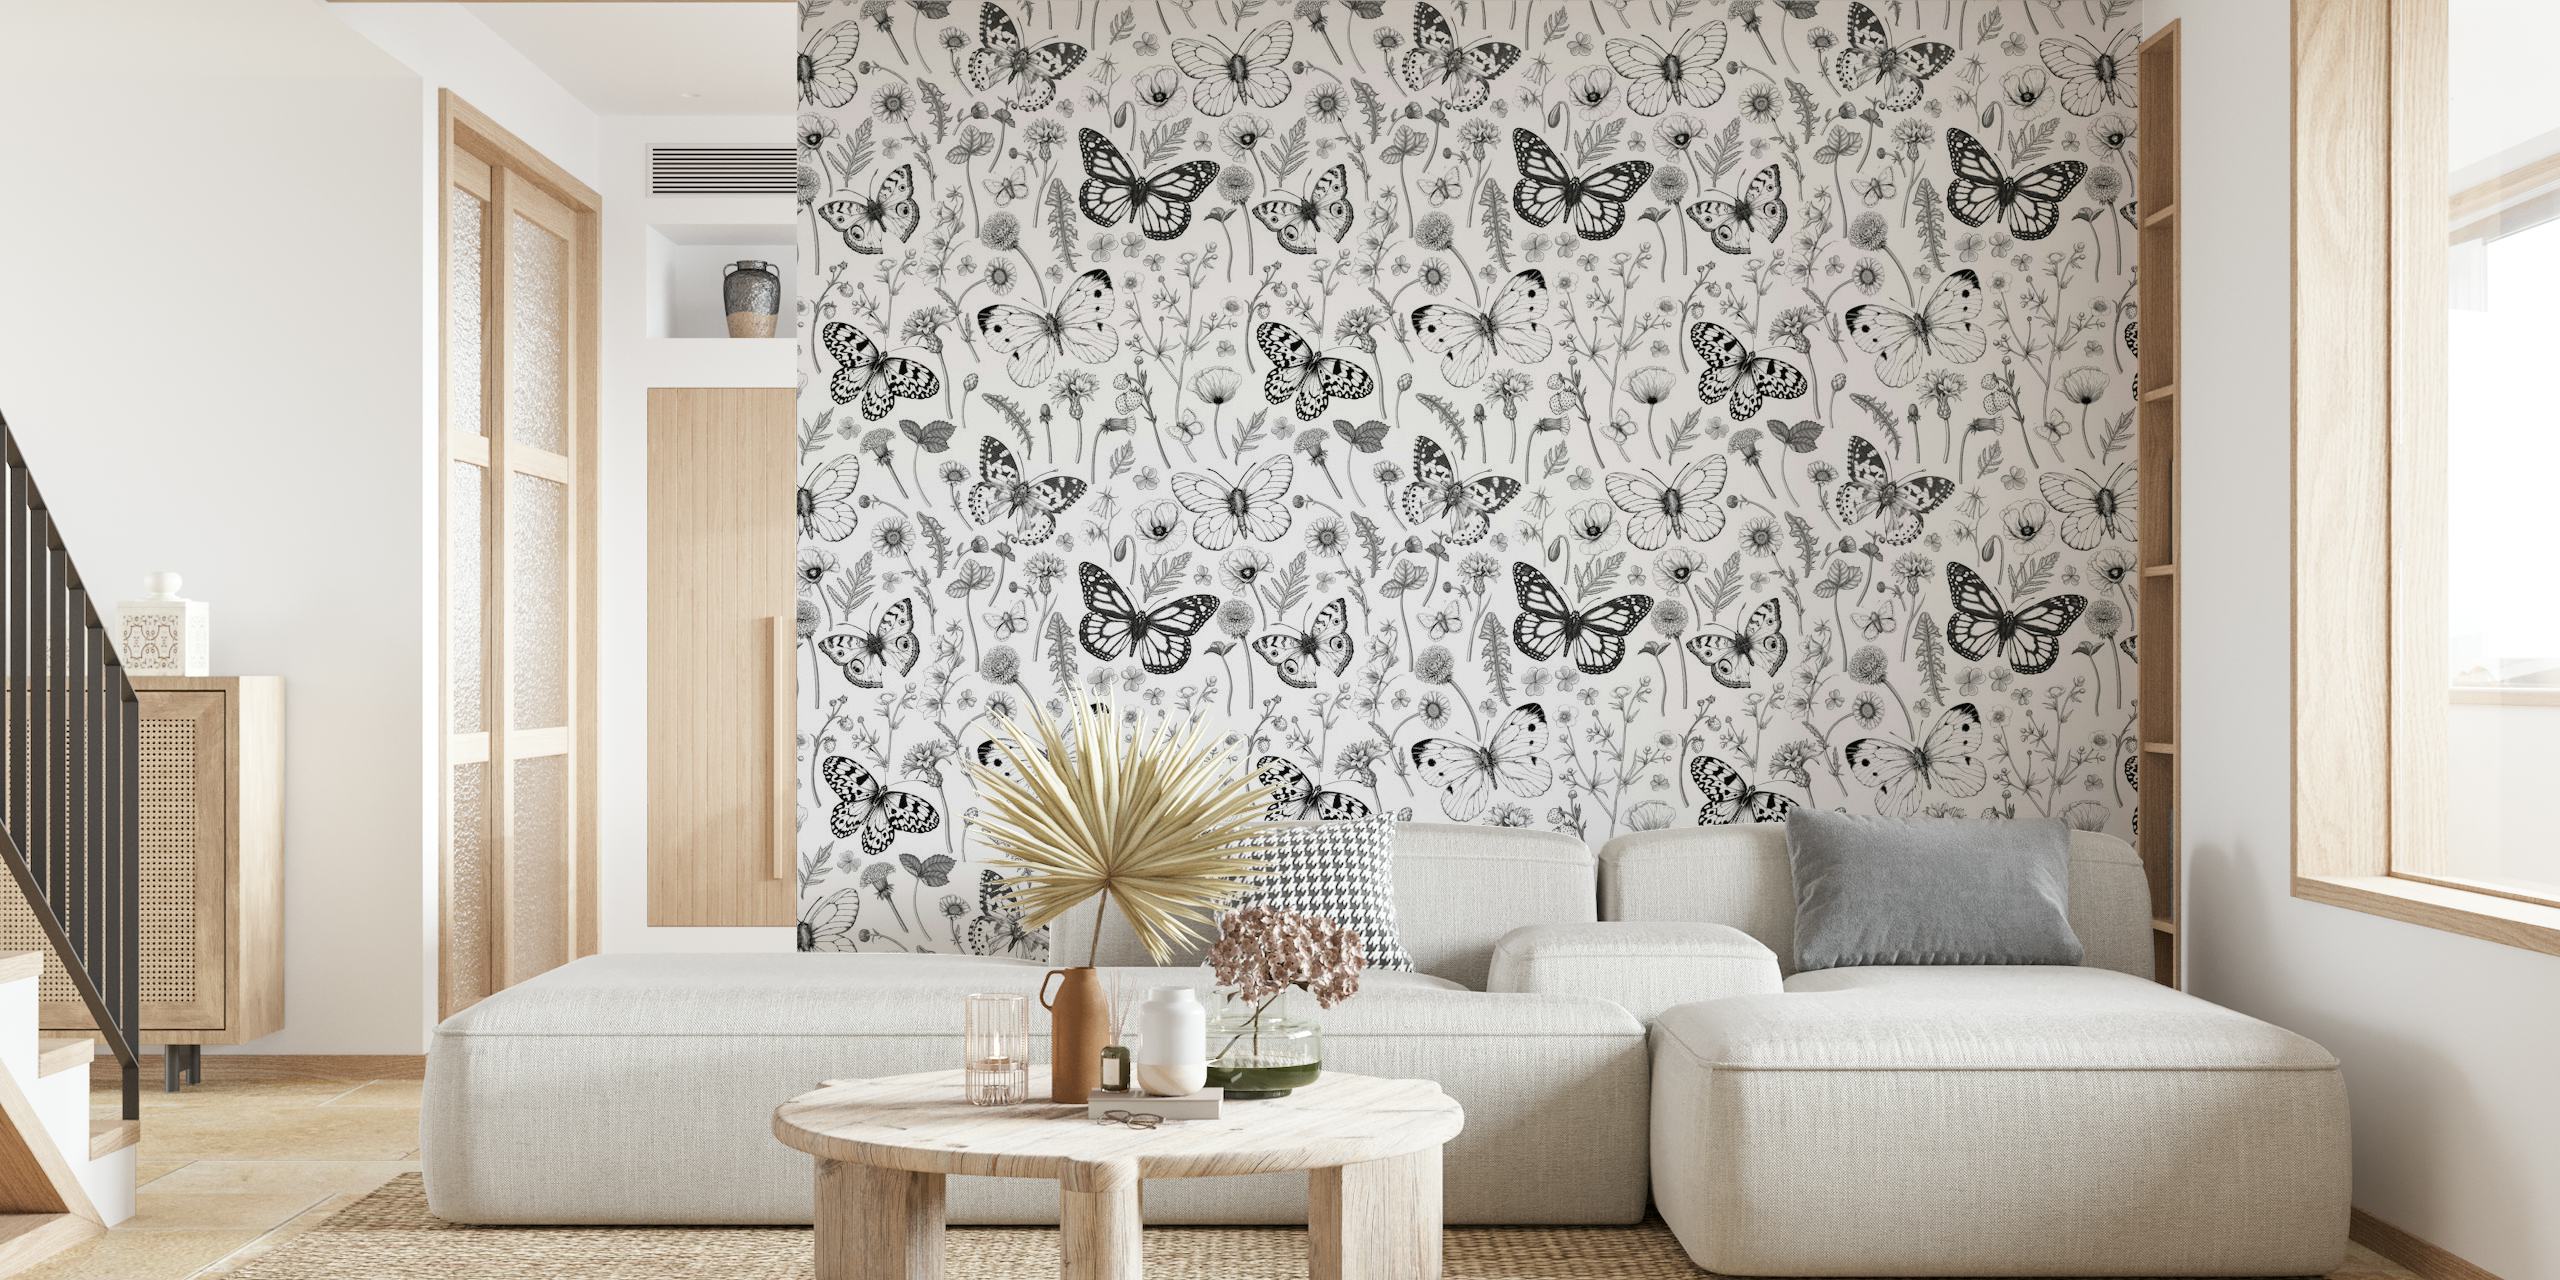 Black and white pattern of wild flowers and butterflies for wall mural